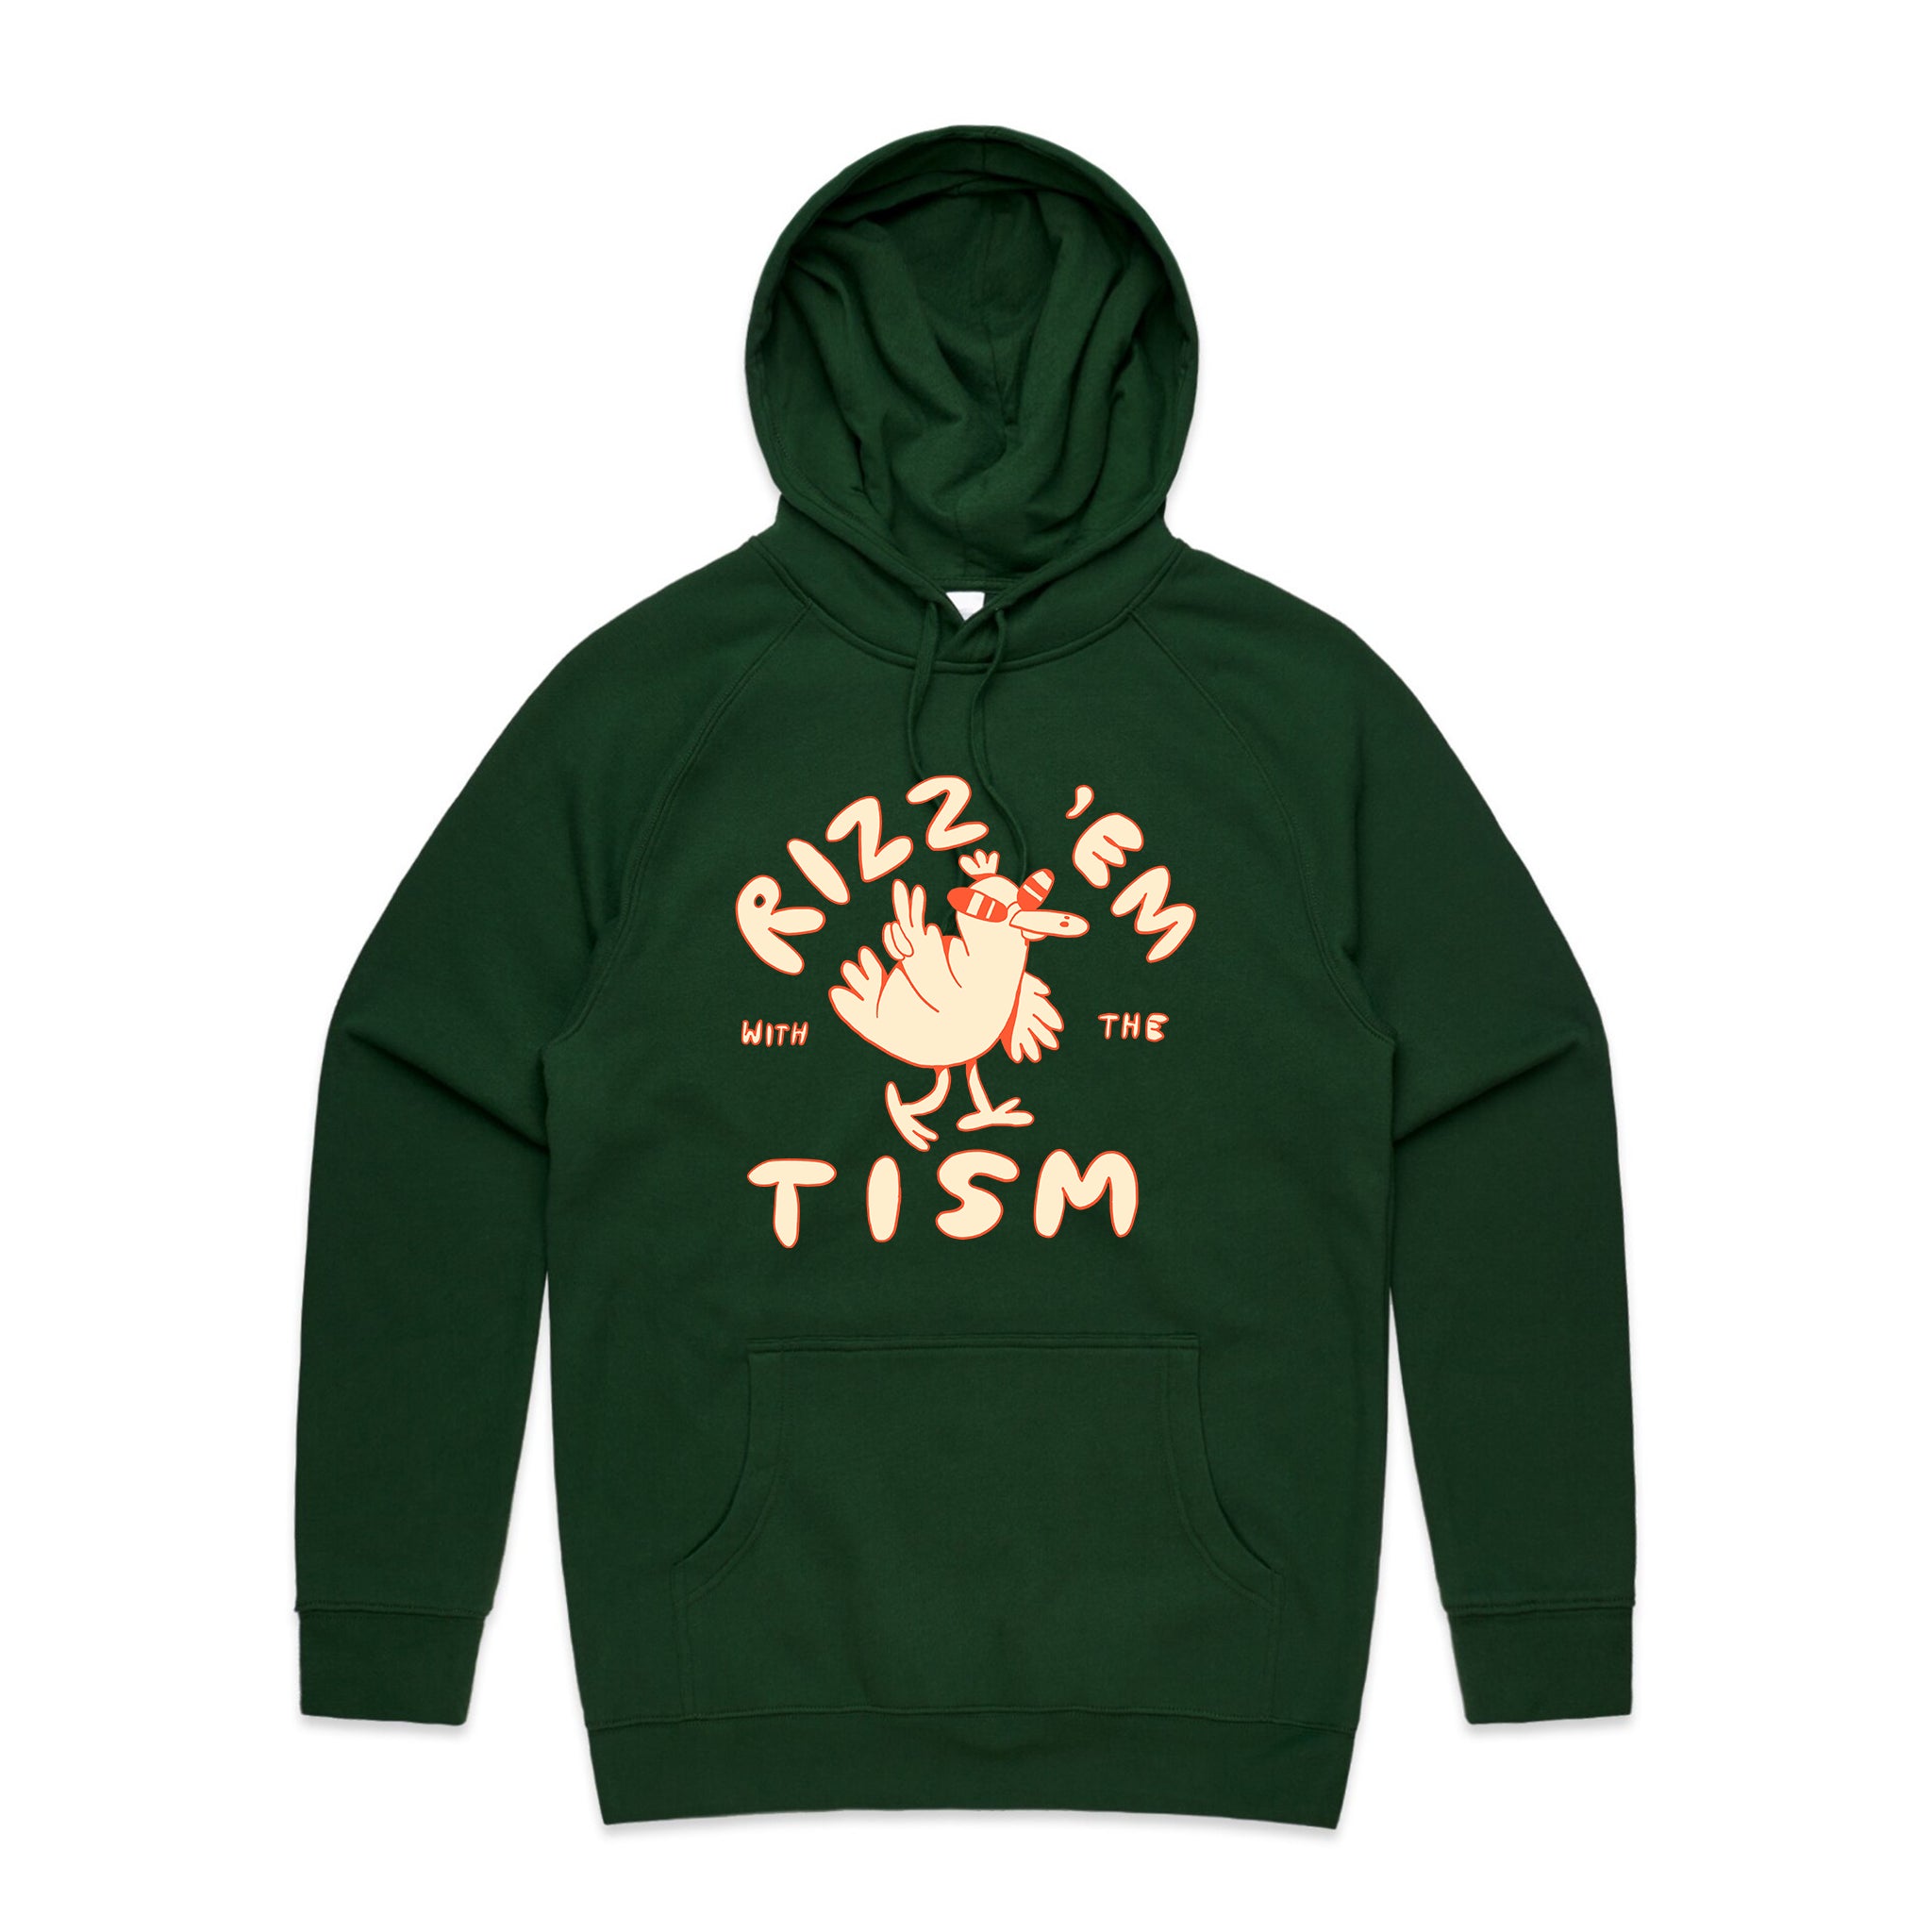 Rizz 'Em With The 'Tism Hoodie